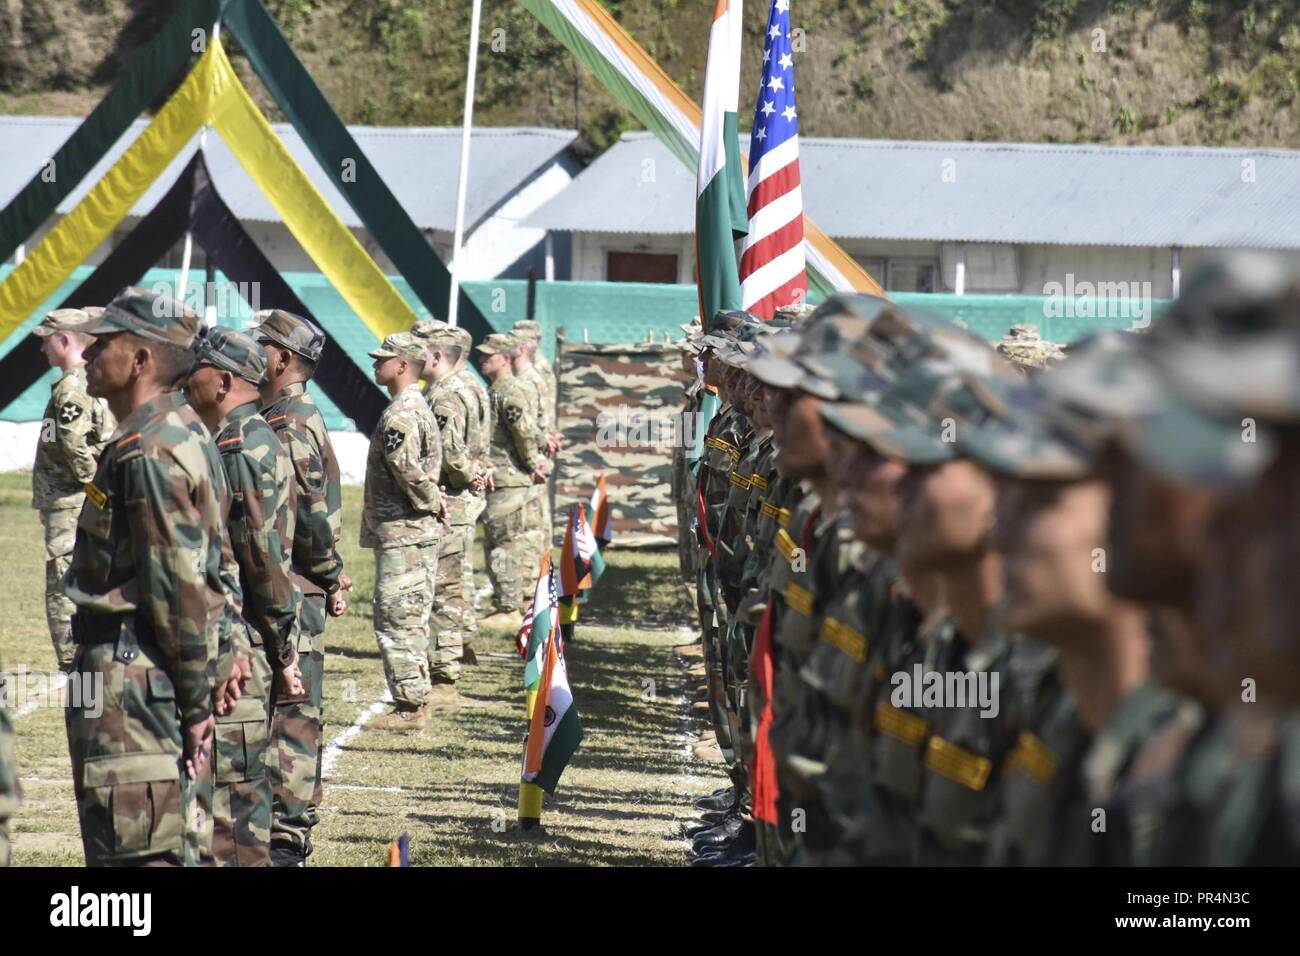 Soldiers with the Indian and U.S. armies listen to remarks at Chaubattia Military Station in Ranikhet, India, Sept. 16, 2018, during the opening ceremony of Yudh Abhyas 18. The bilateral training exercise geared toward enhancing cooperation and coordination between the two nations’ armies through training and cultural exchanges. Stock Photo